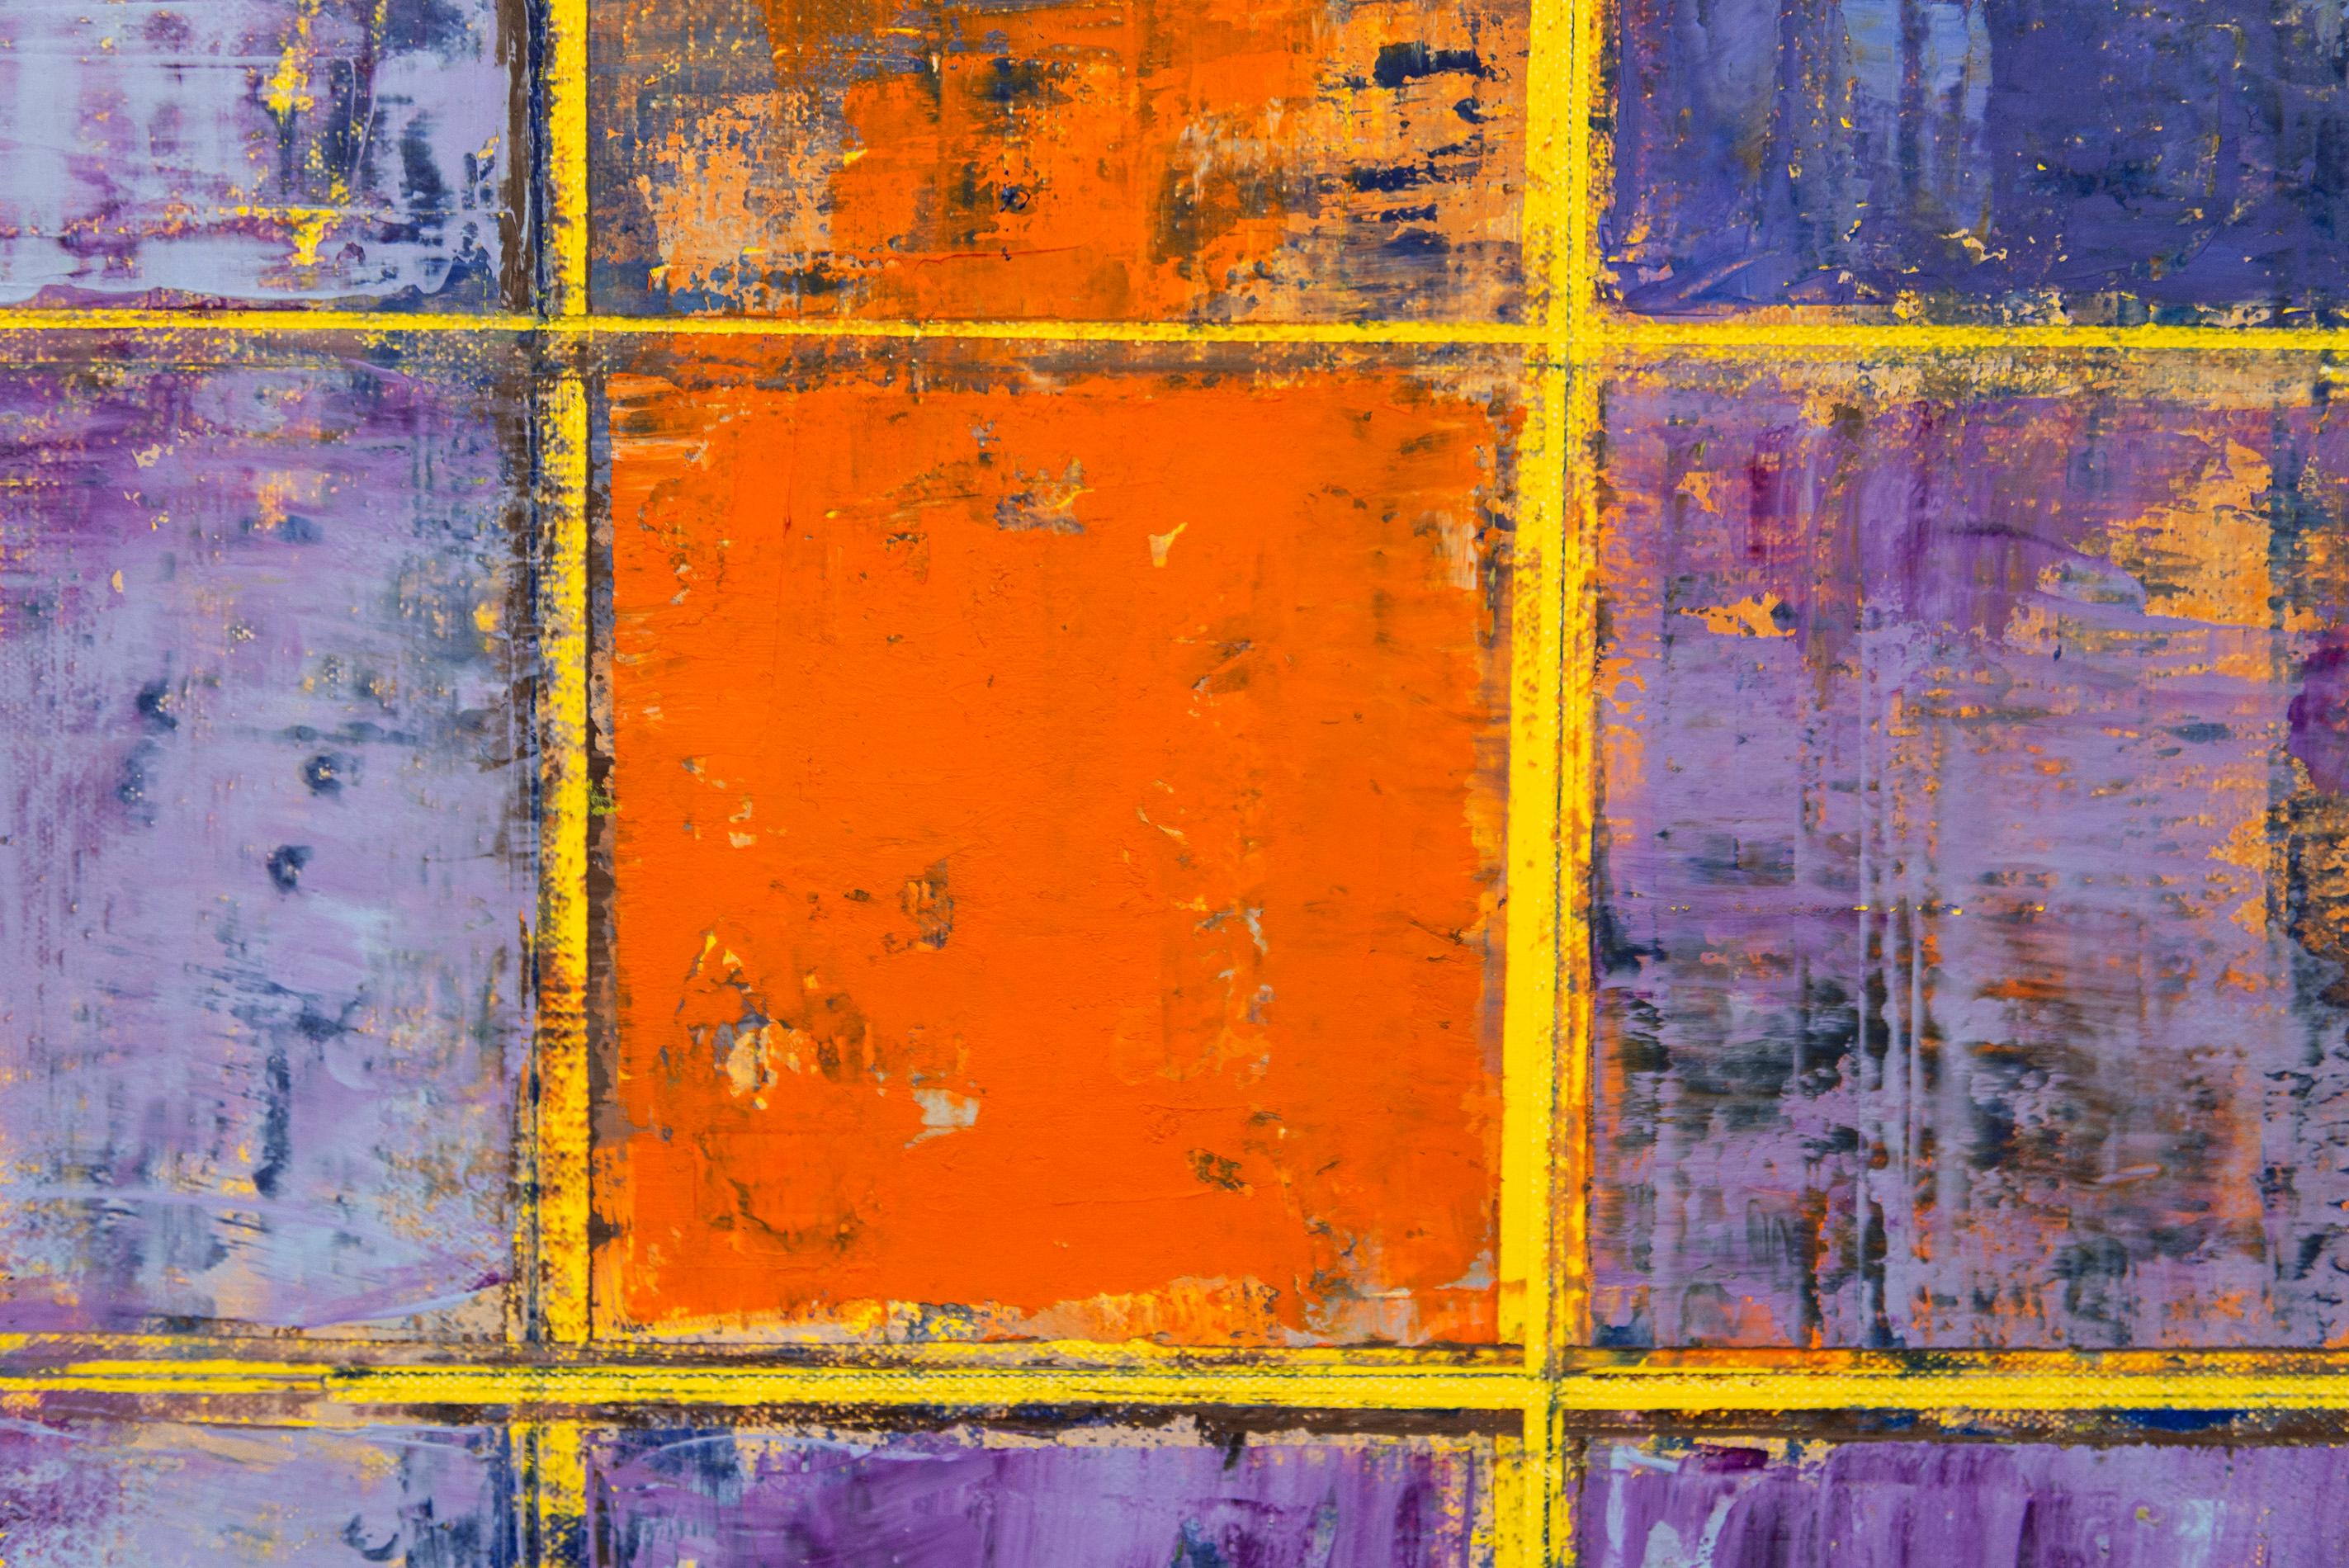 Kite - bold, bright, colorful, abstract, grid, modernist, oil on canvas 1